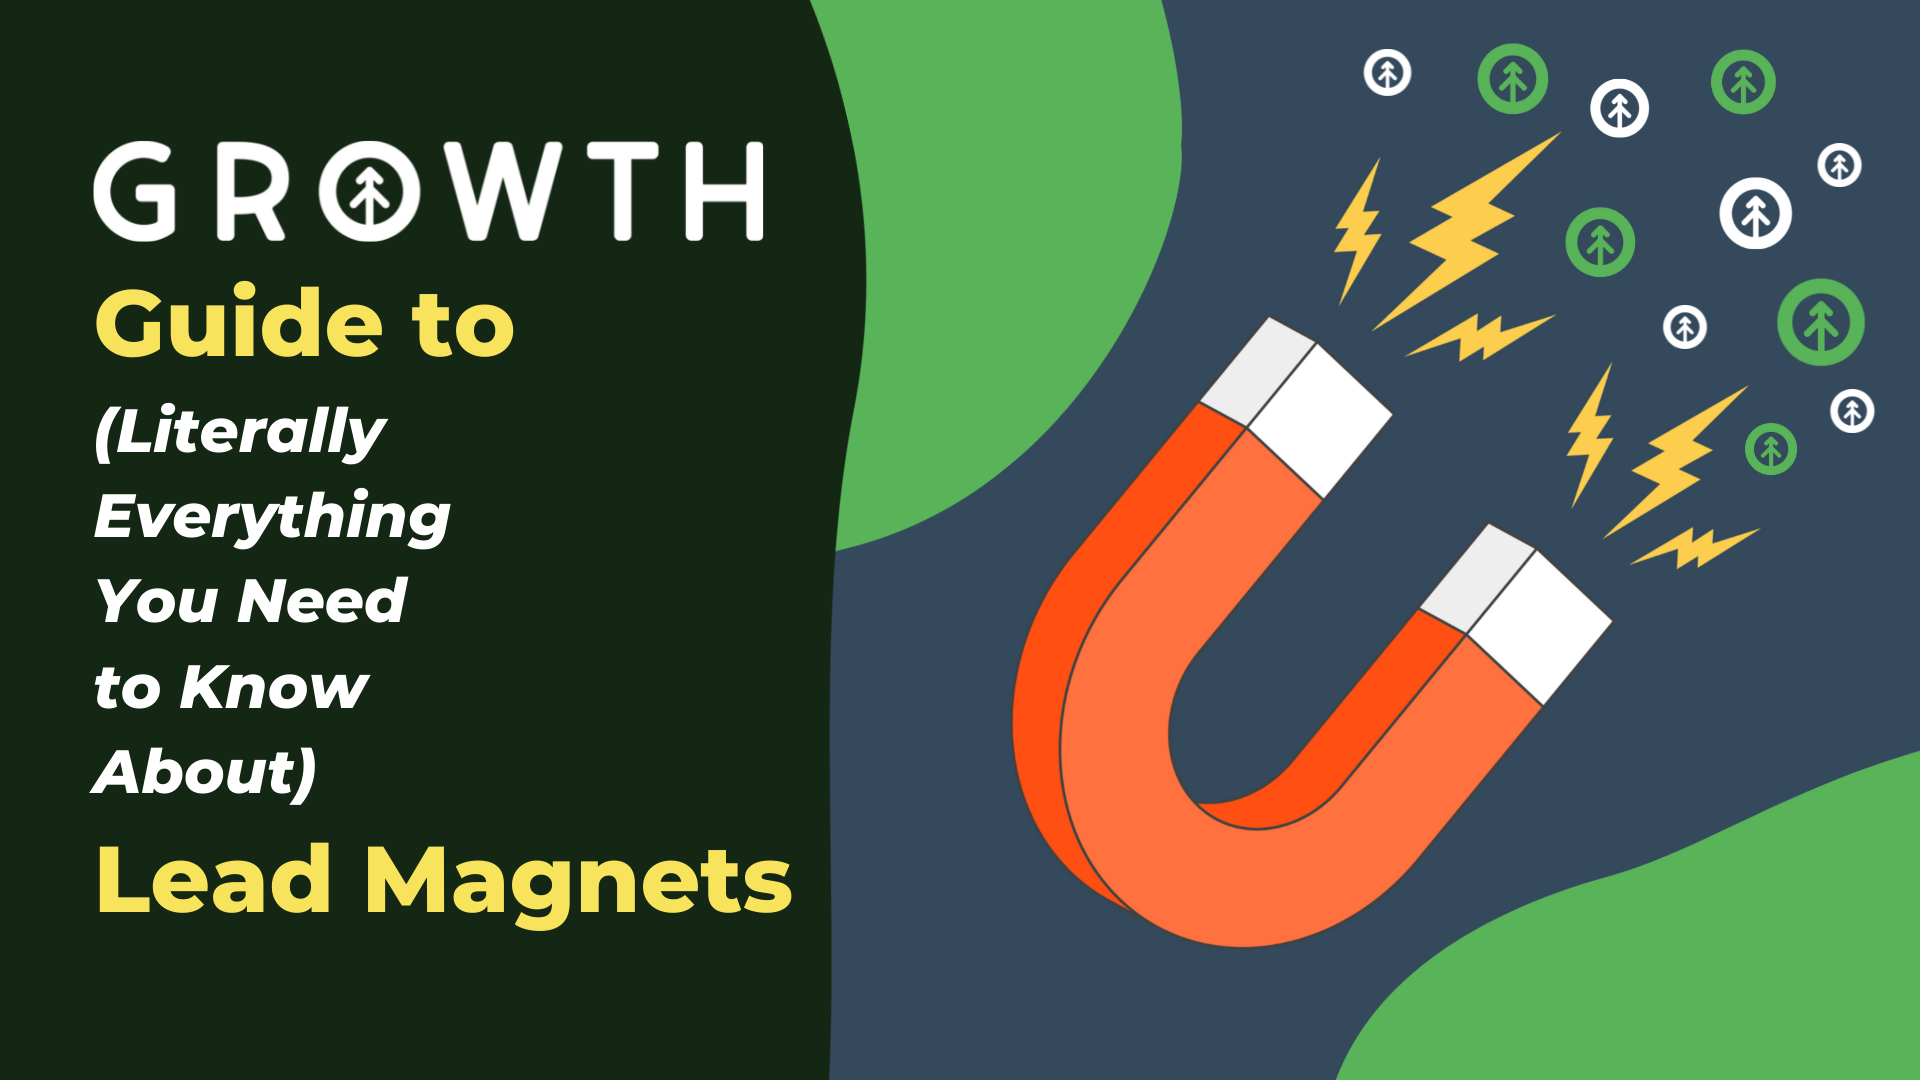 The Growth Guide to Lead Magnets